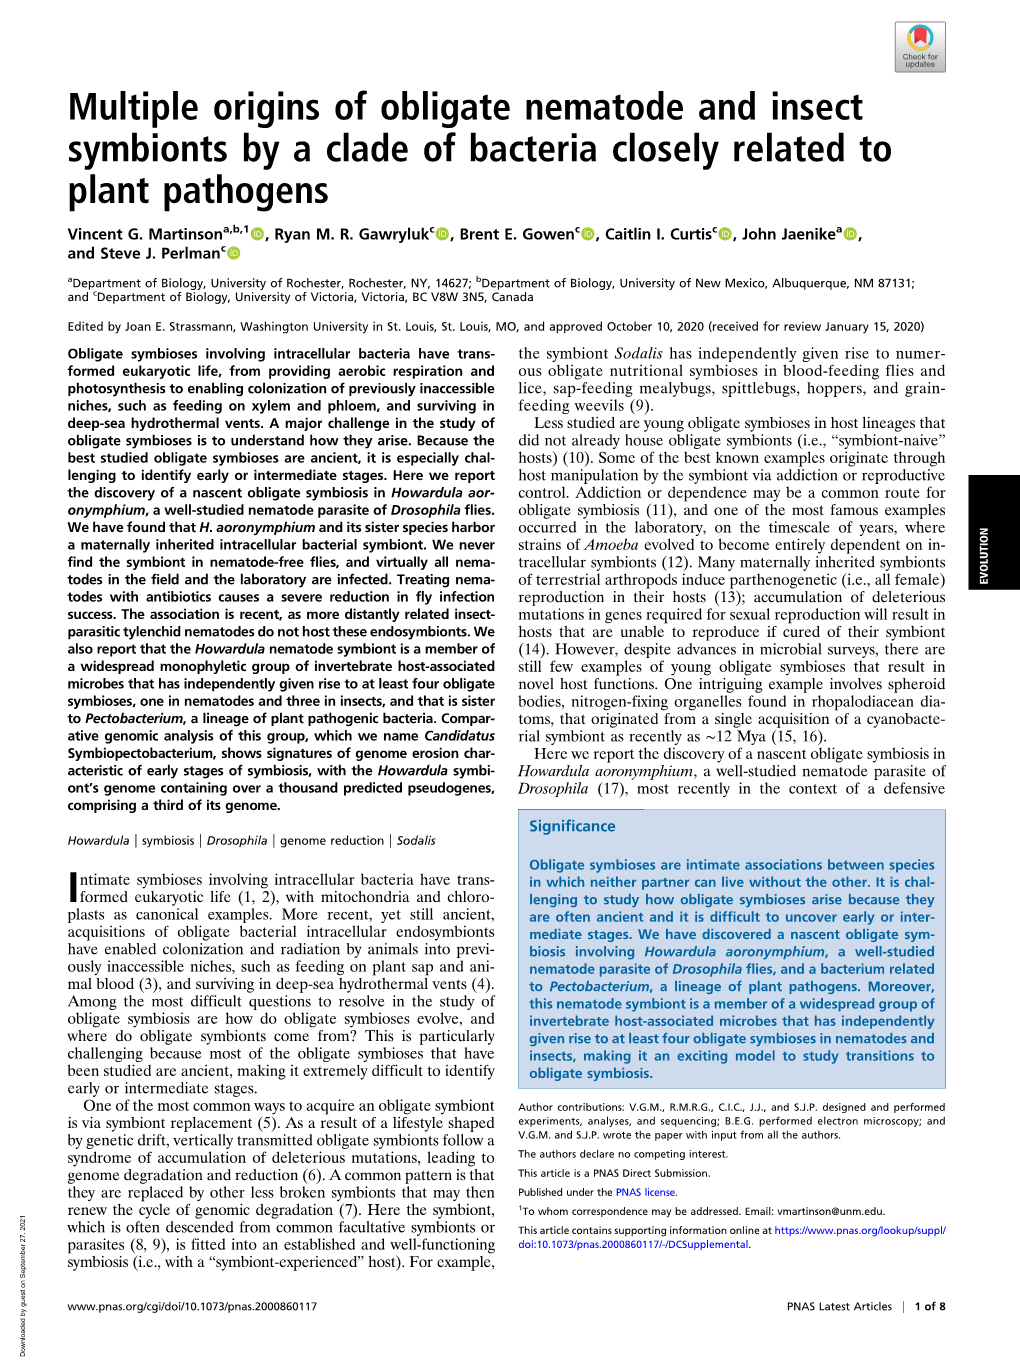 Multiple Origins of Obligate Nematode and Insect Symbionts by a Clade of Bacteria Closely Related to Plant Pathogens